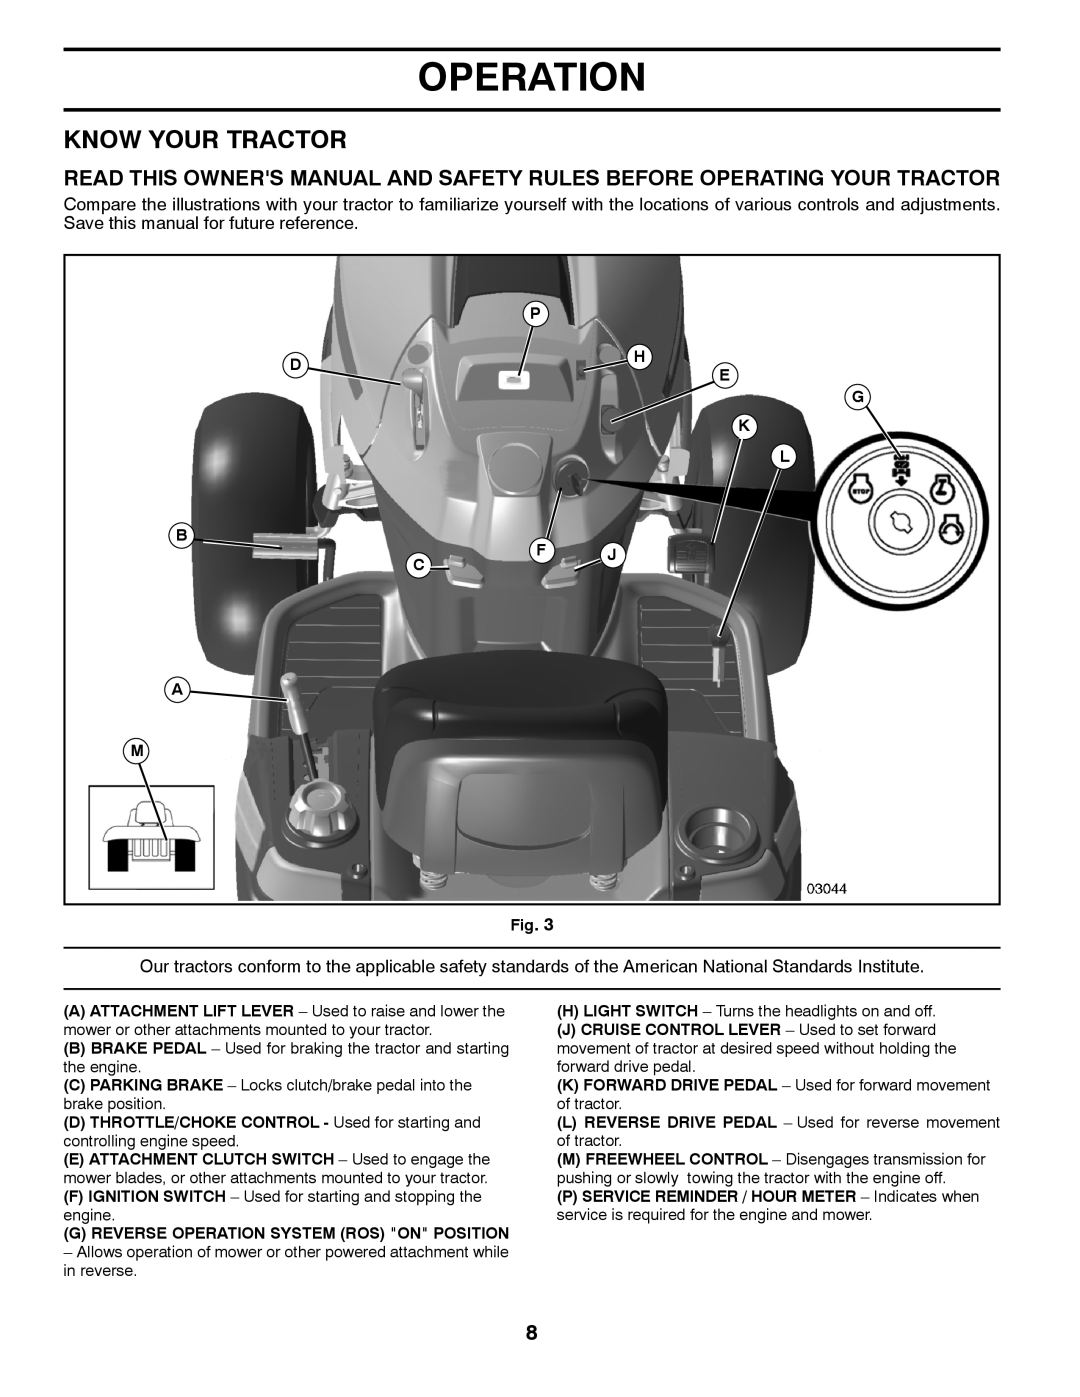 Husqvarna 96045002700 Know Your Tractor, P Dh E, B A M, G K L Cf J, G Reverse Operation System Ros On Position 